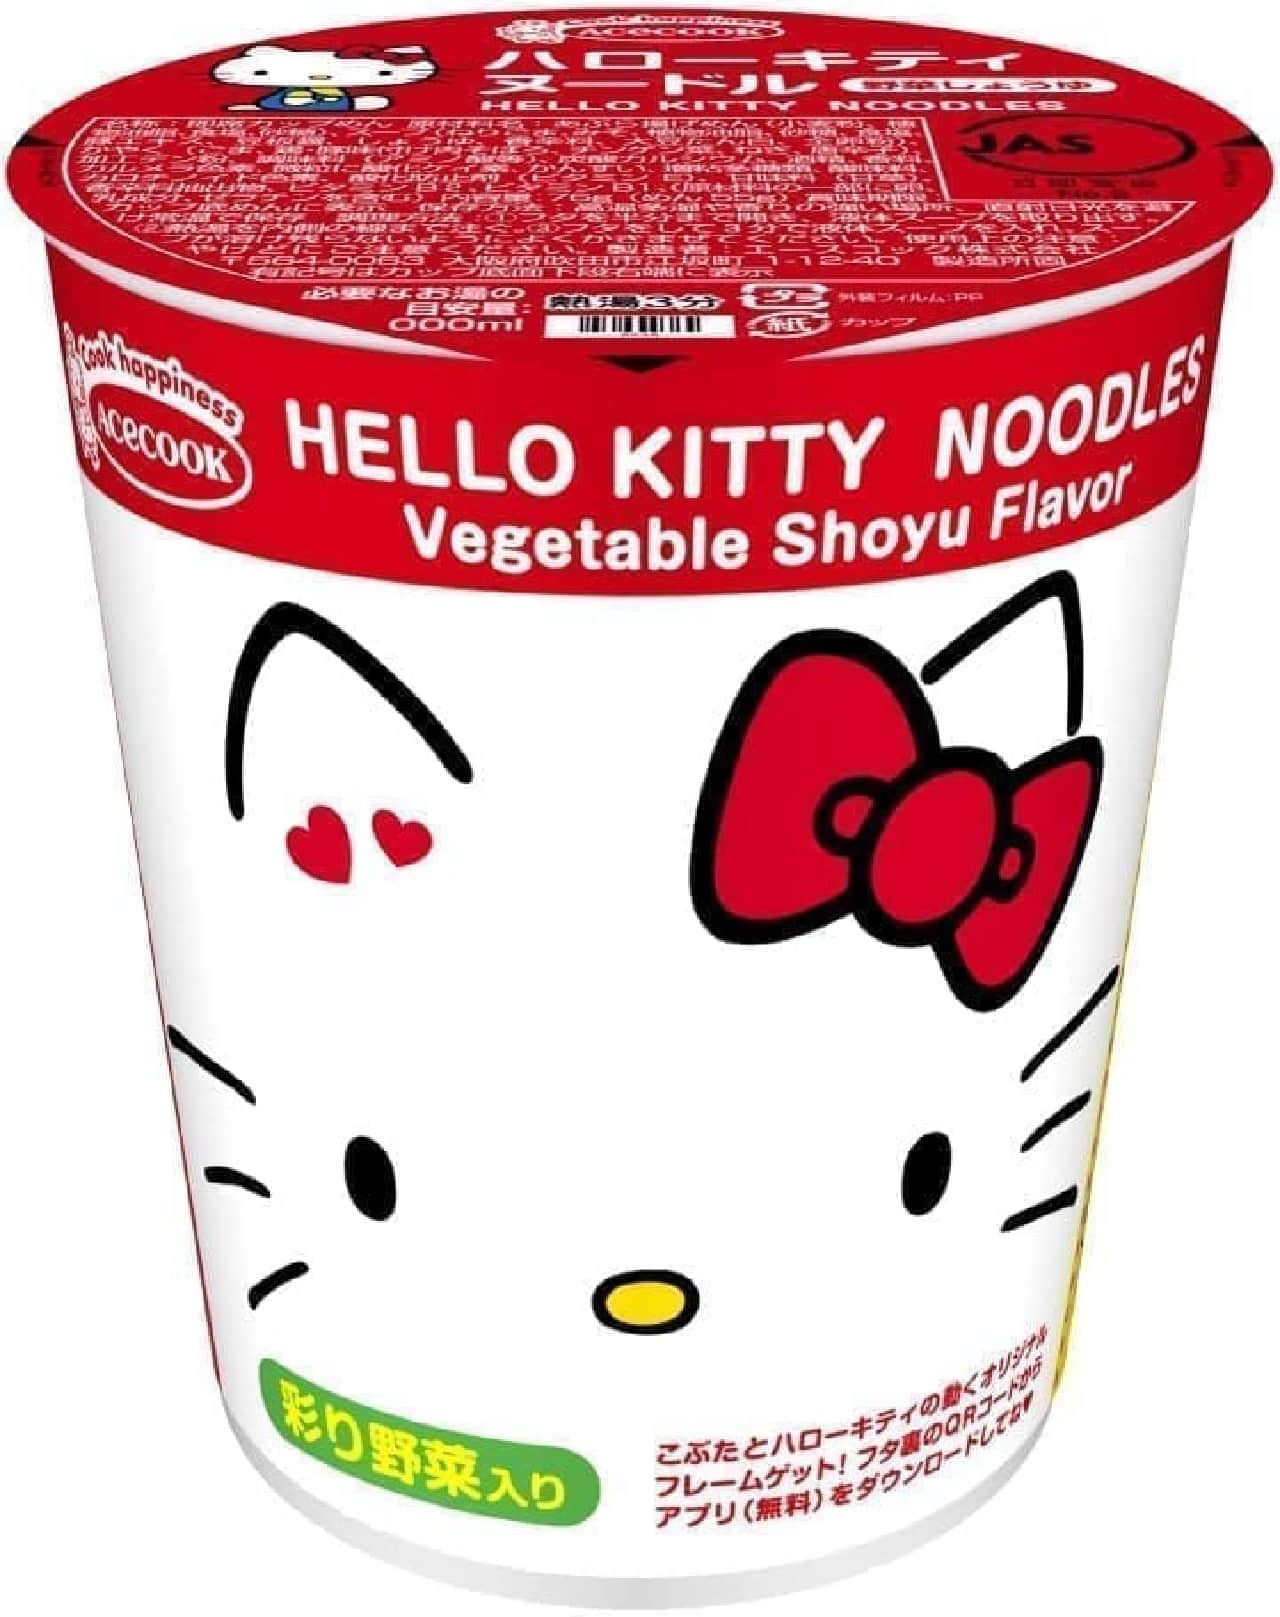 Acecook "Hello Kitty Noodle Vegetable Soy Sauce"